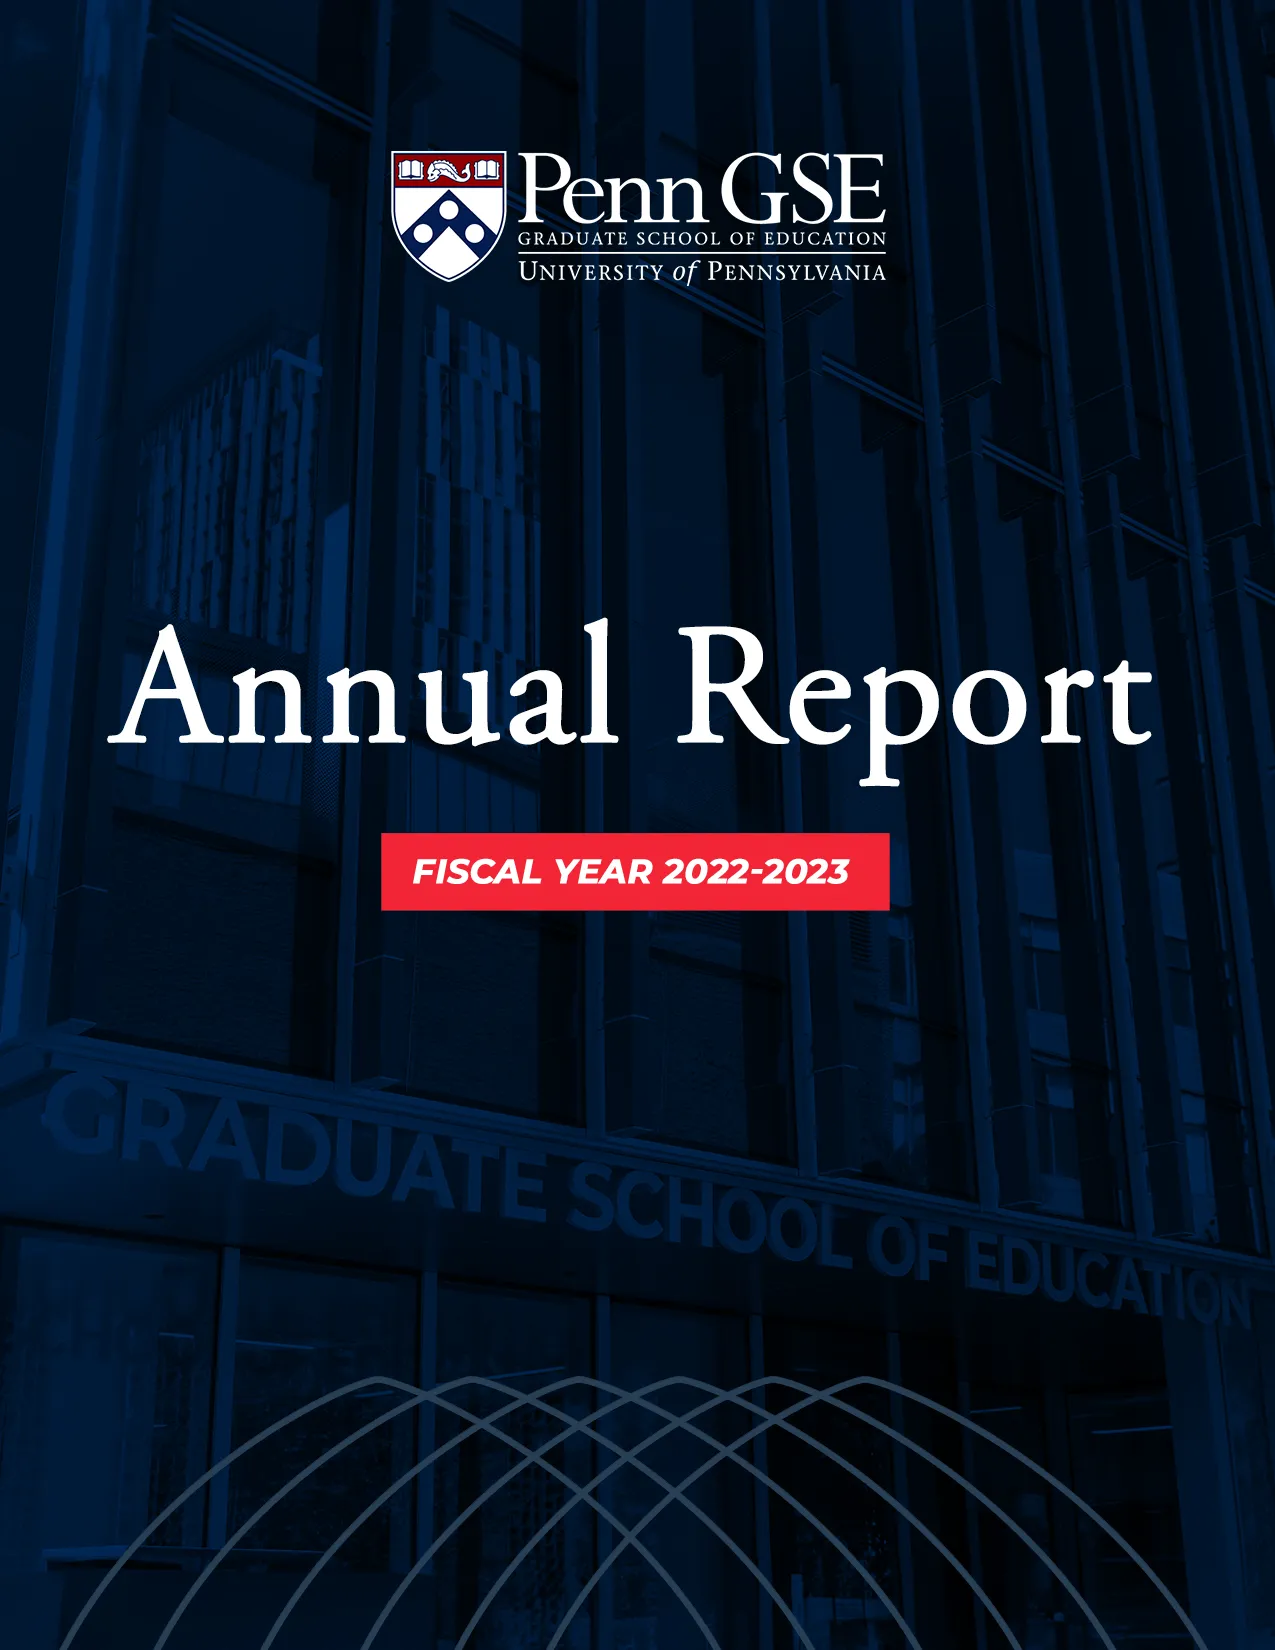 Penn GSE Annual Report 2022-2023 Cover